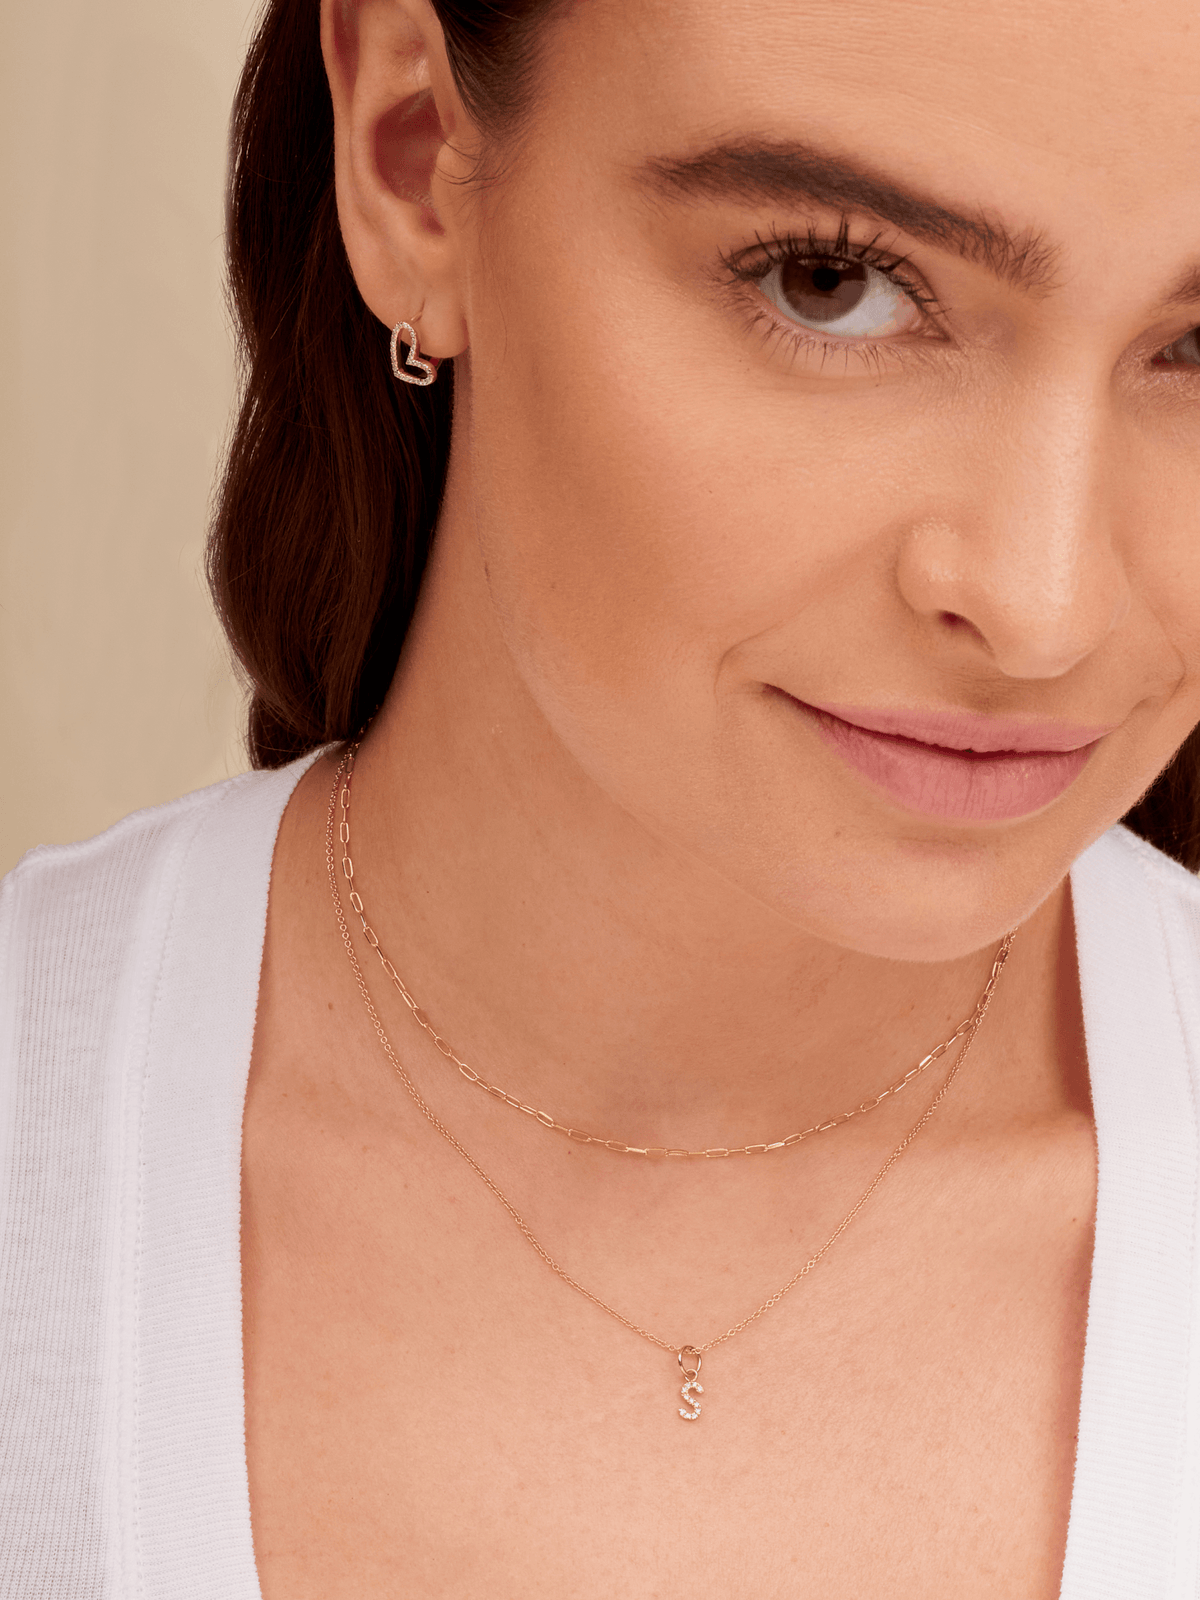 Dainty gold chain link necklace layered with diamond initial necklace